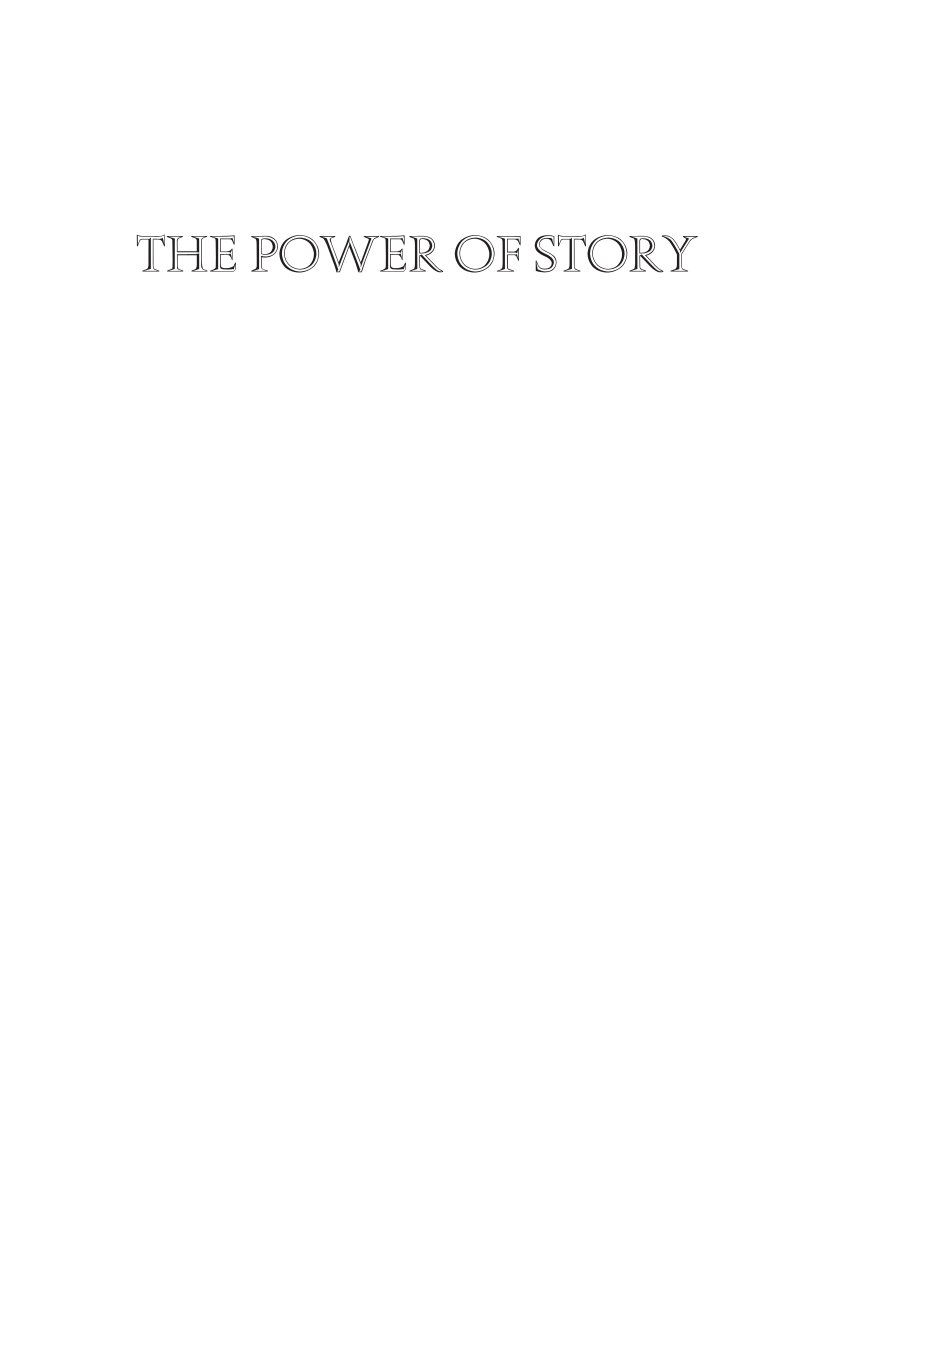 The Power of Story page i